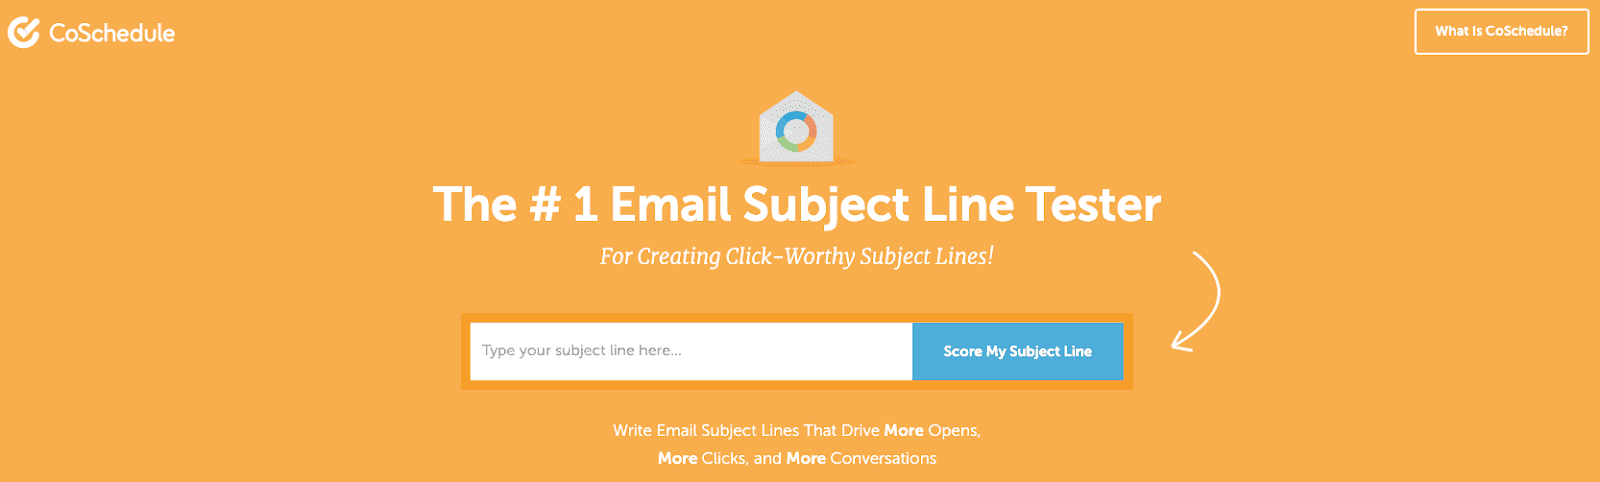 CoSchedule email subject line tester 